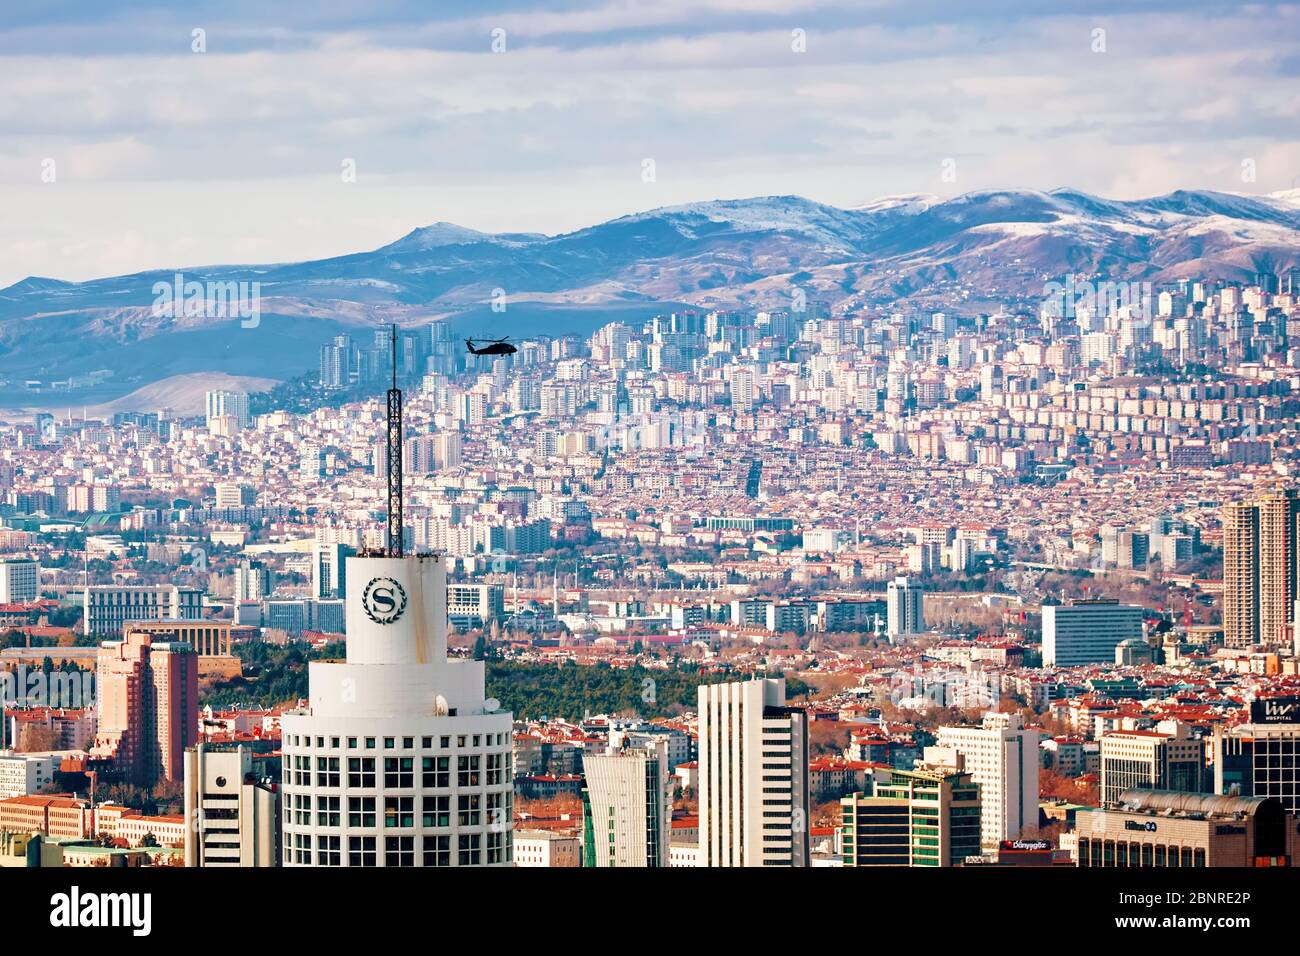 March, 2020 - Ankara, Turkey: Panoramic cityscape of Ankara, Turkey with a helicopter flying over the city. View from Cankaya district. Stock Photo